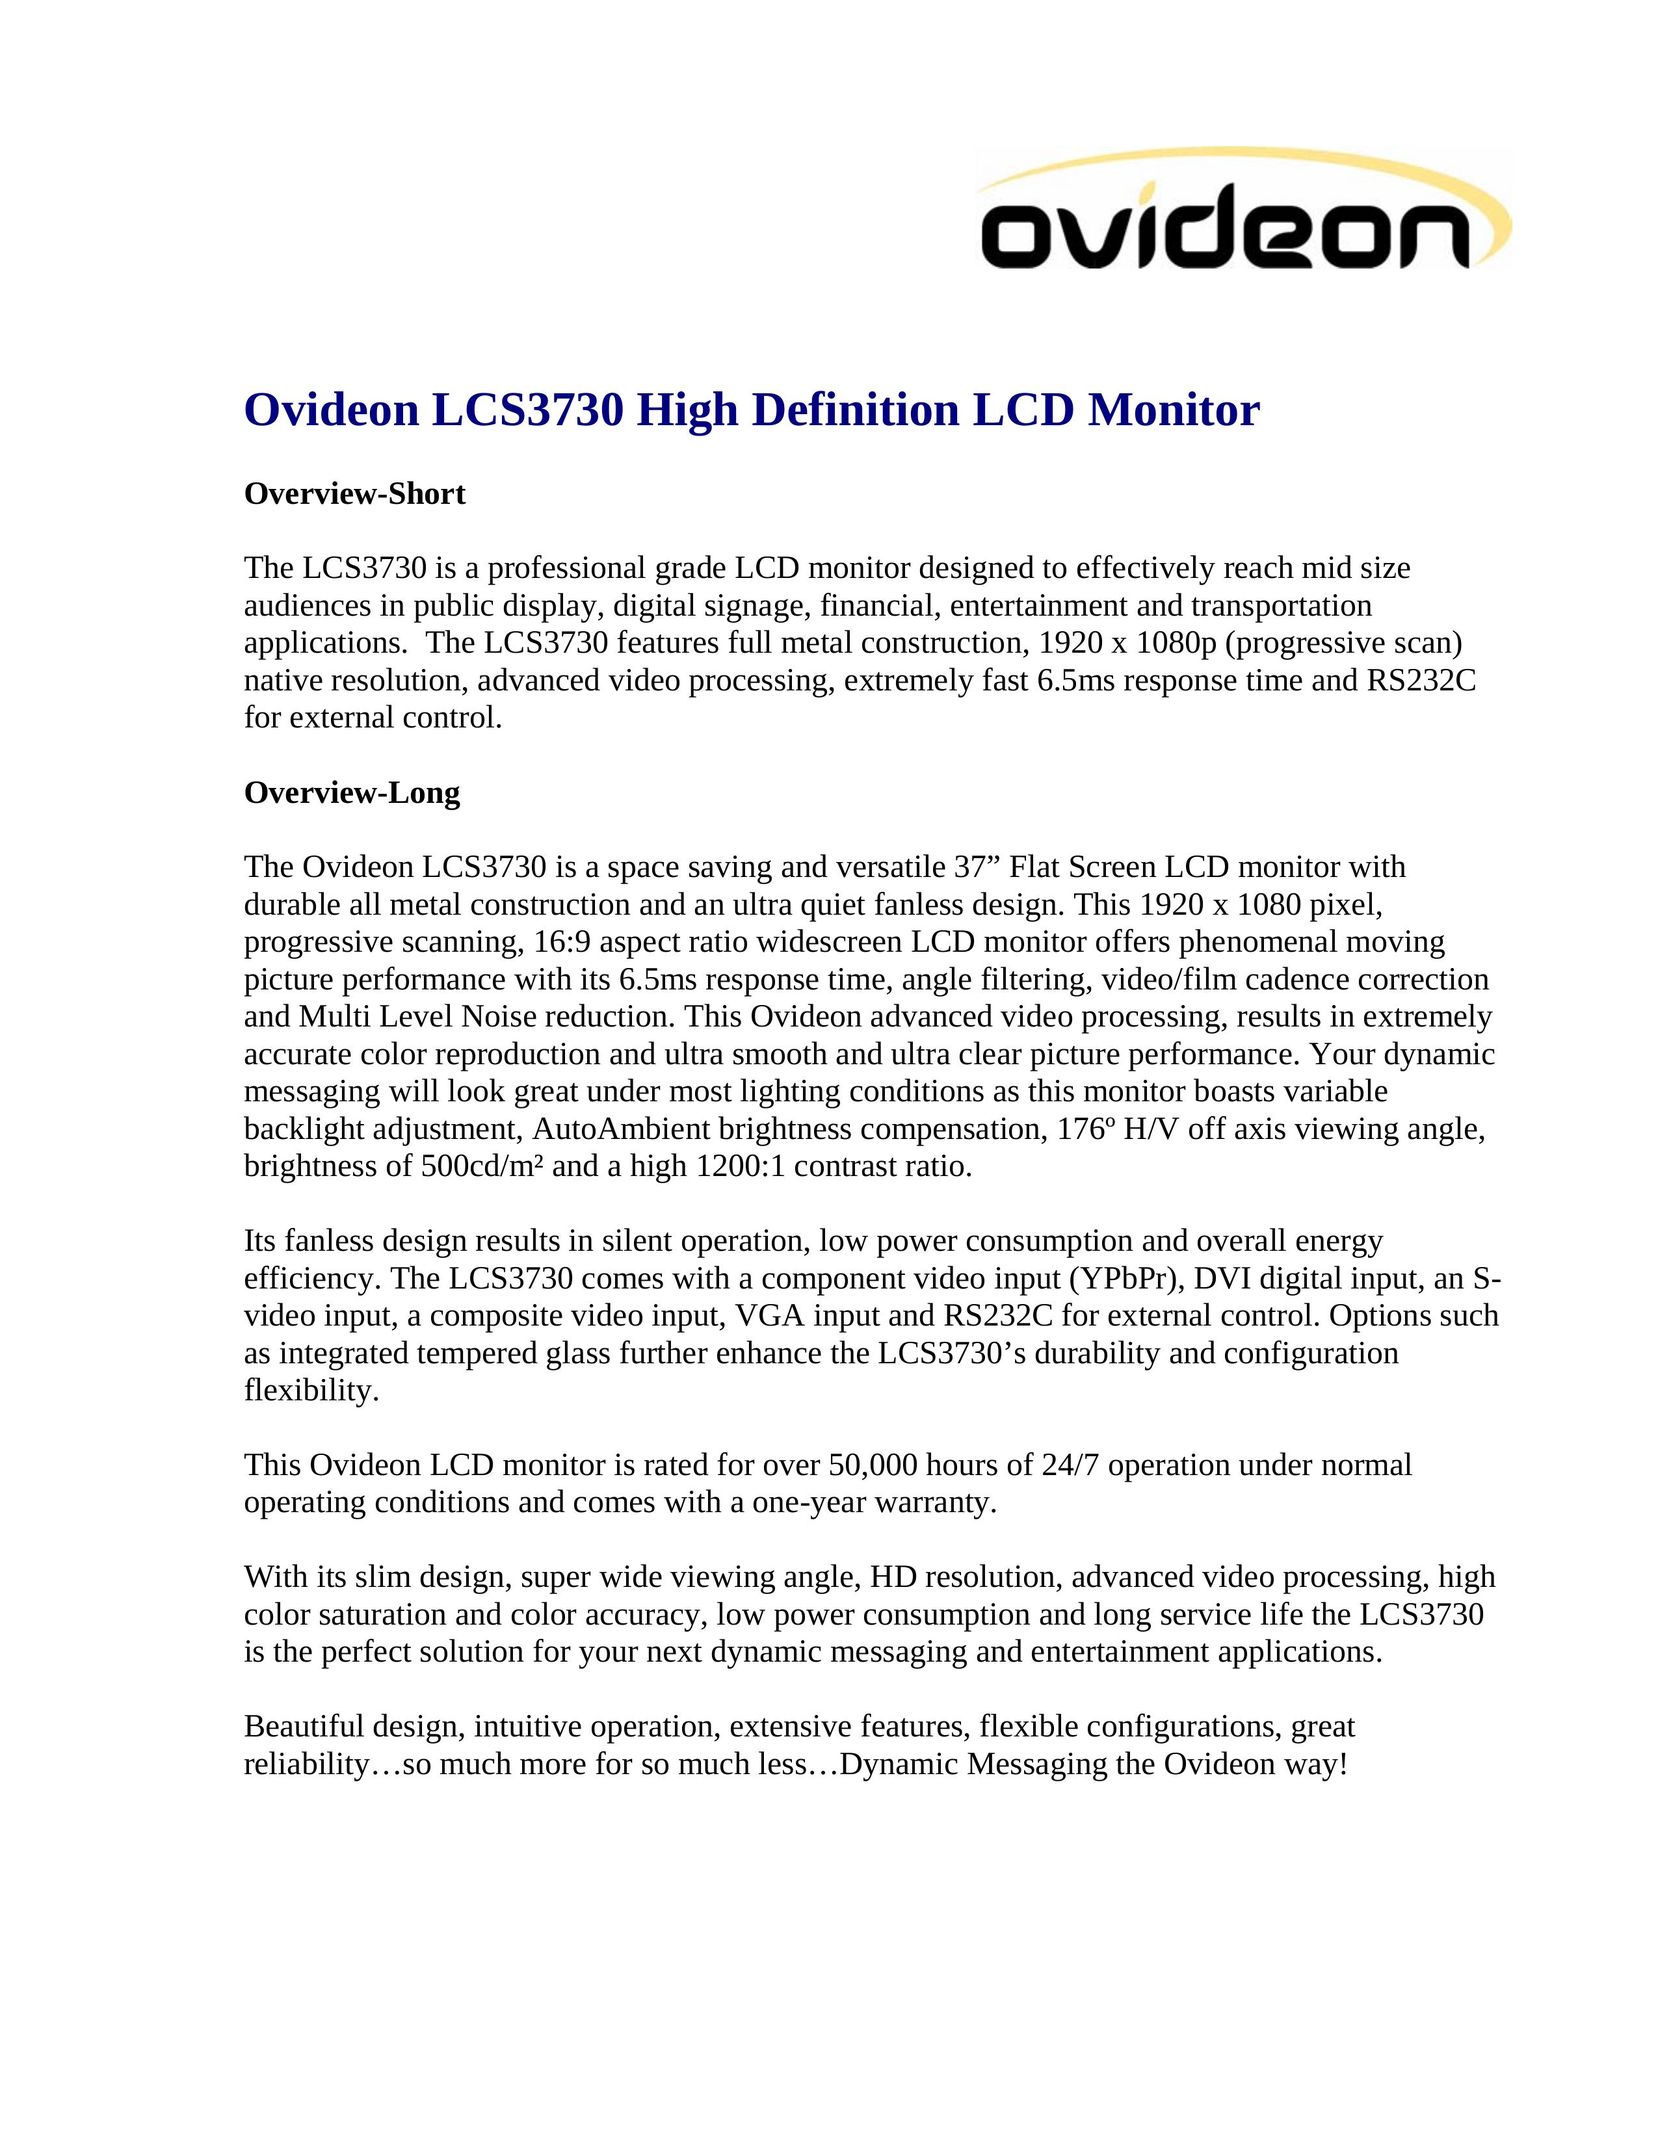 Ovideon LCS3730 Car Video System User Manual